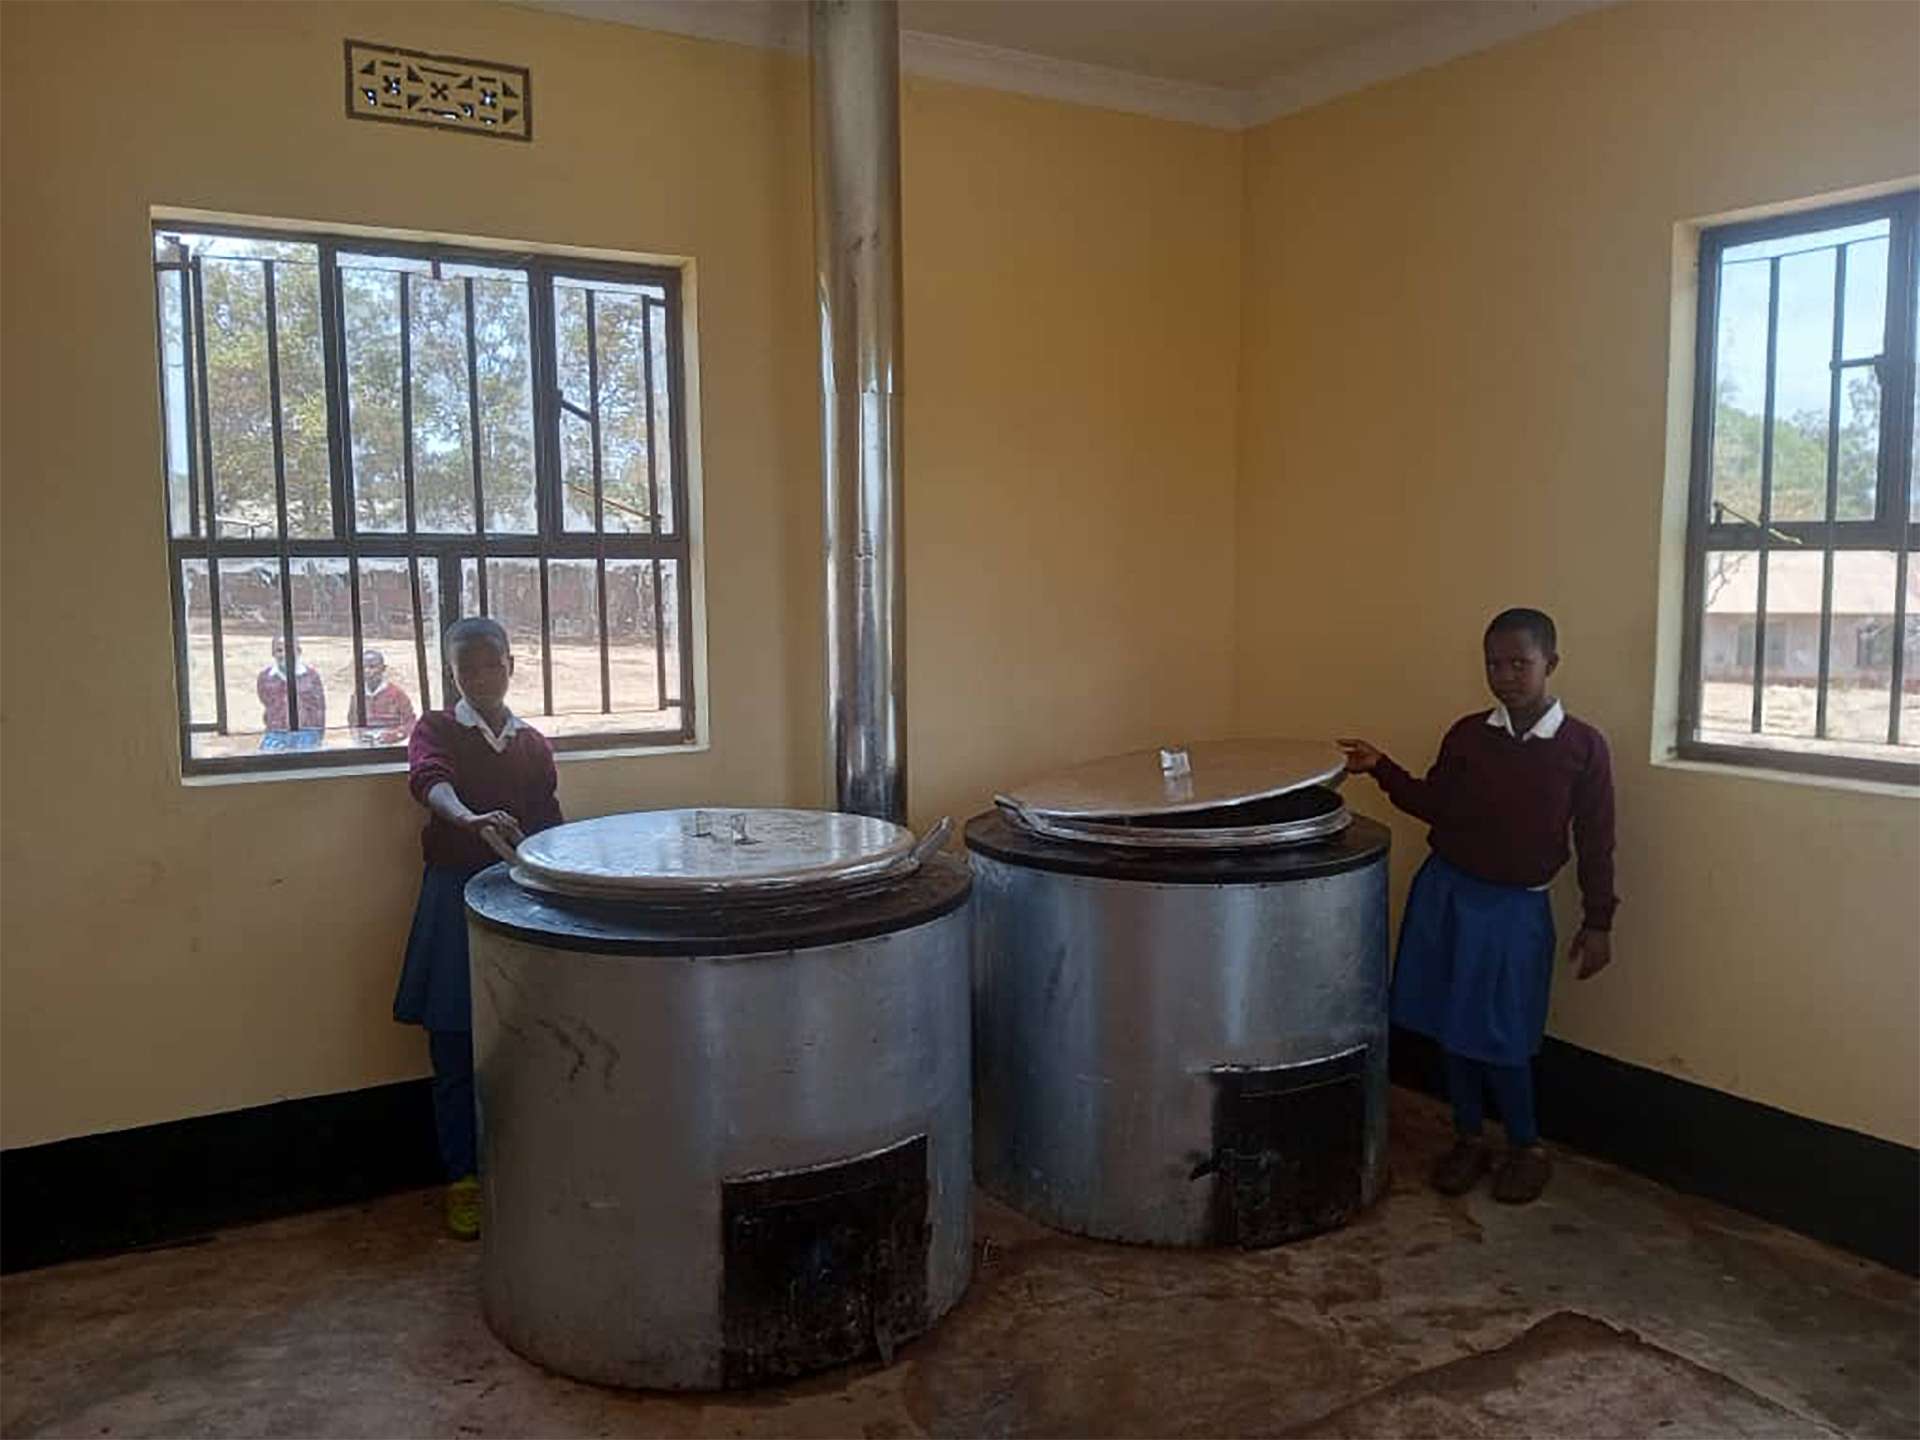 Two smiling children from a school in Tanzania take a photo next to donated kitchen materials from Nat Hab Philanthropy